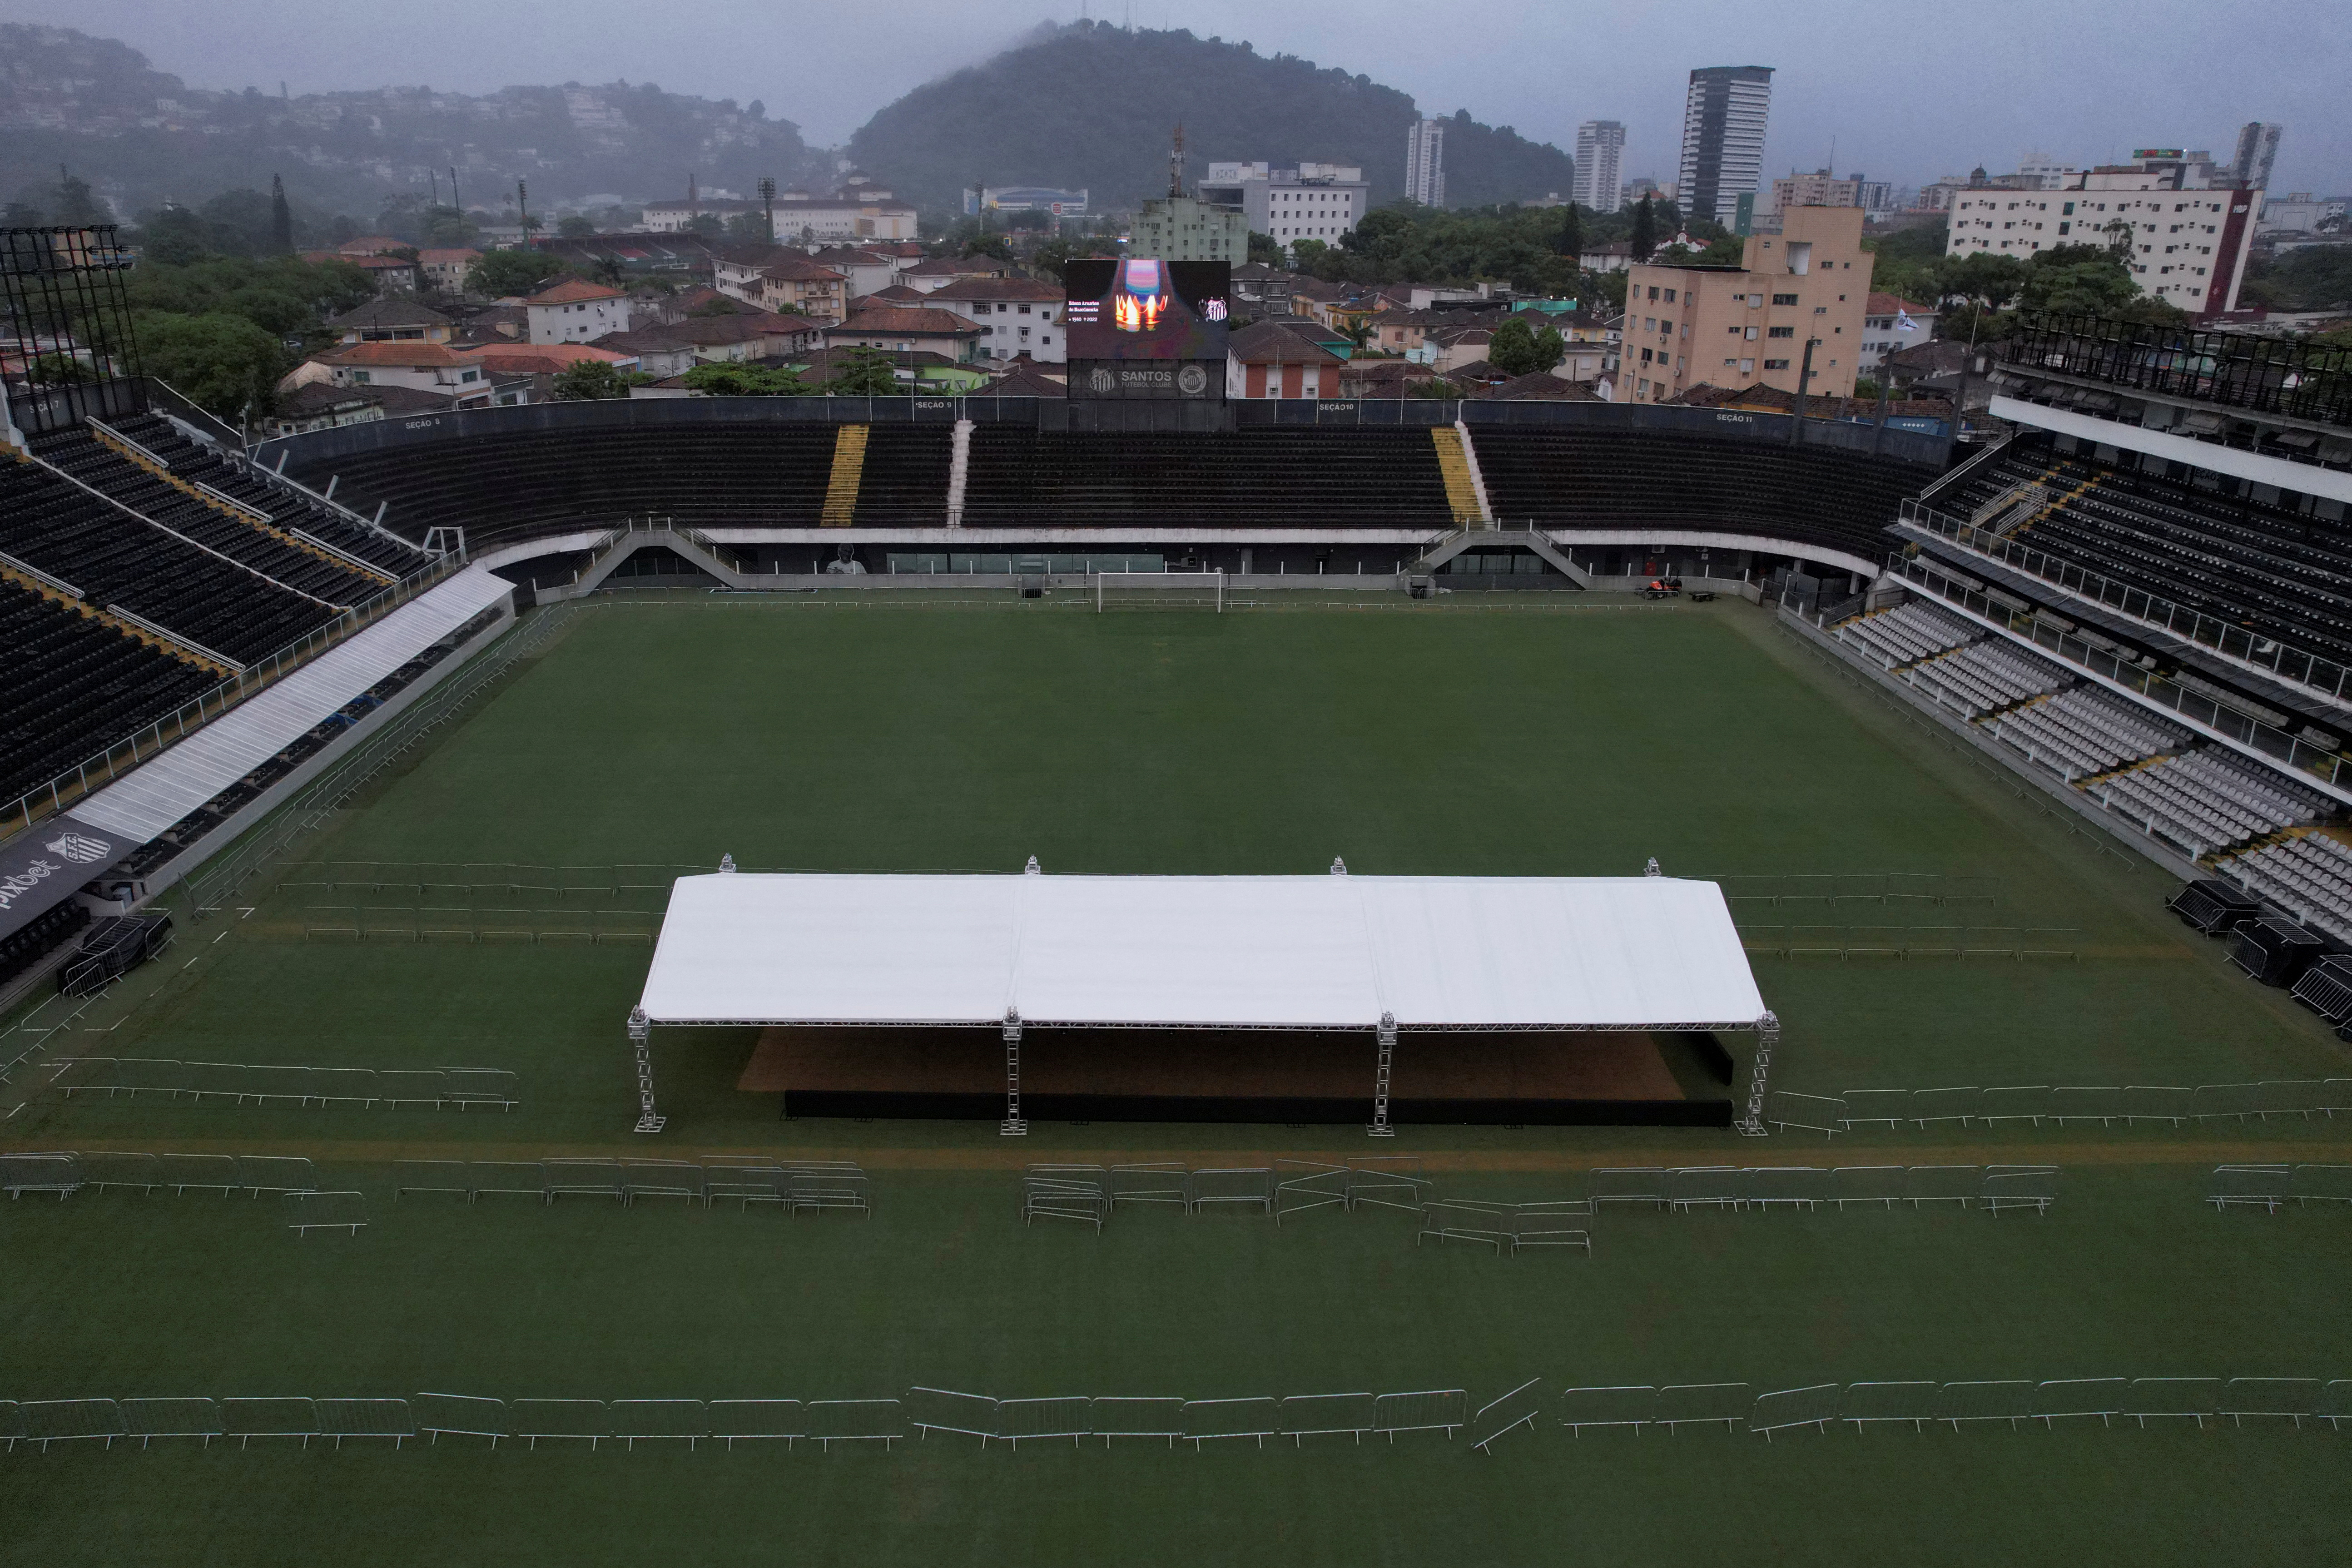 An aerial view shows a tent on the pitch of the Vila Belmiro stadium, home of the Santos FC soccer club where Pele played most of his career, as a crown and text that reads ‘Edson Arantes do Nascimento - 1940 - 2022” is displayed on a screen, in Santos, Brazil December 30, 2022. REUTERS/Amanda Perobelli